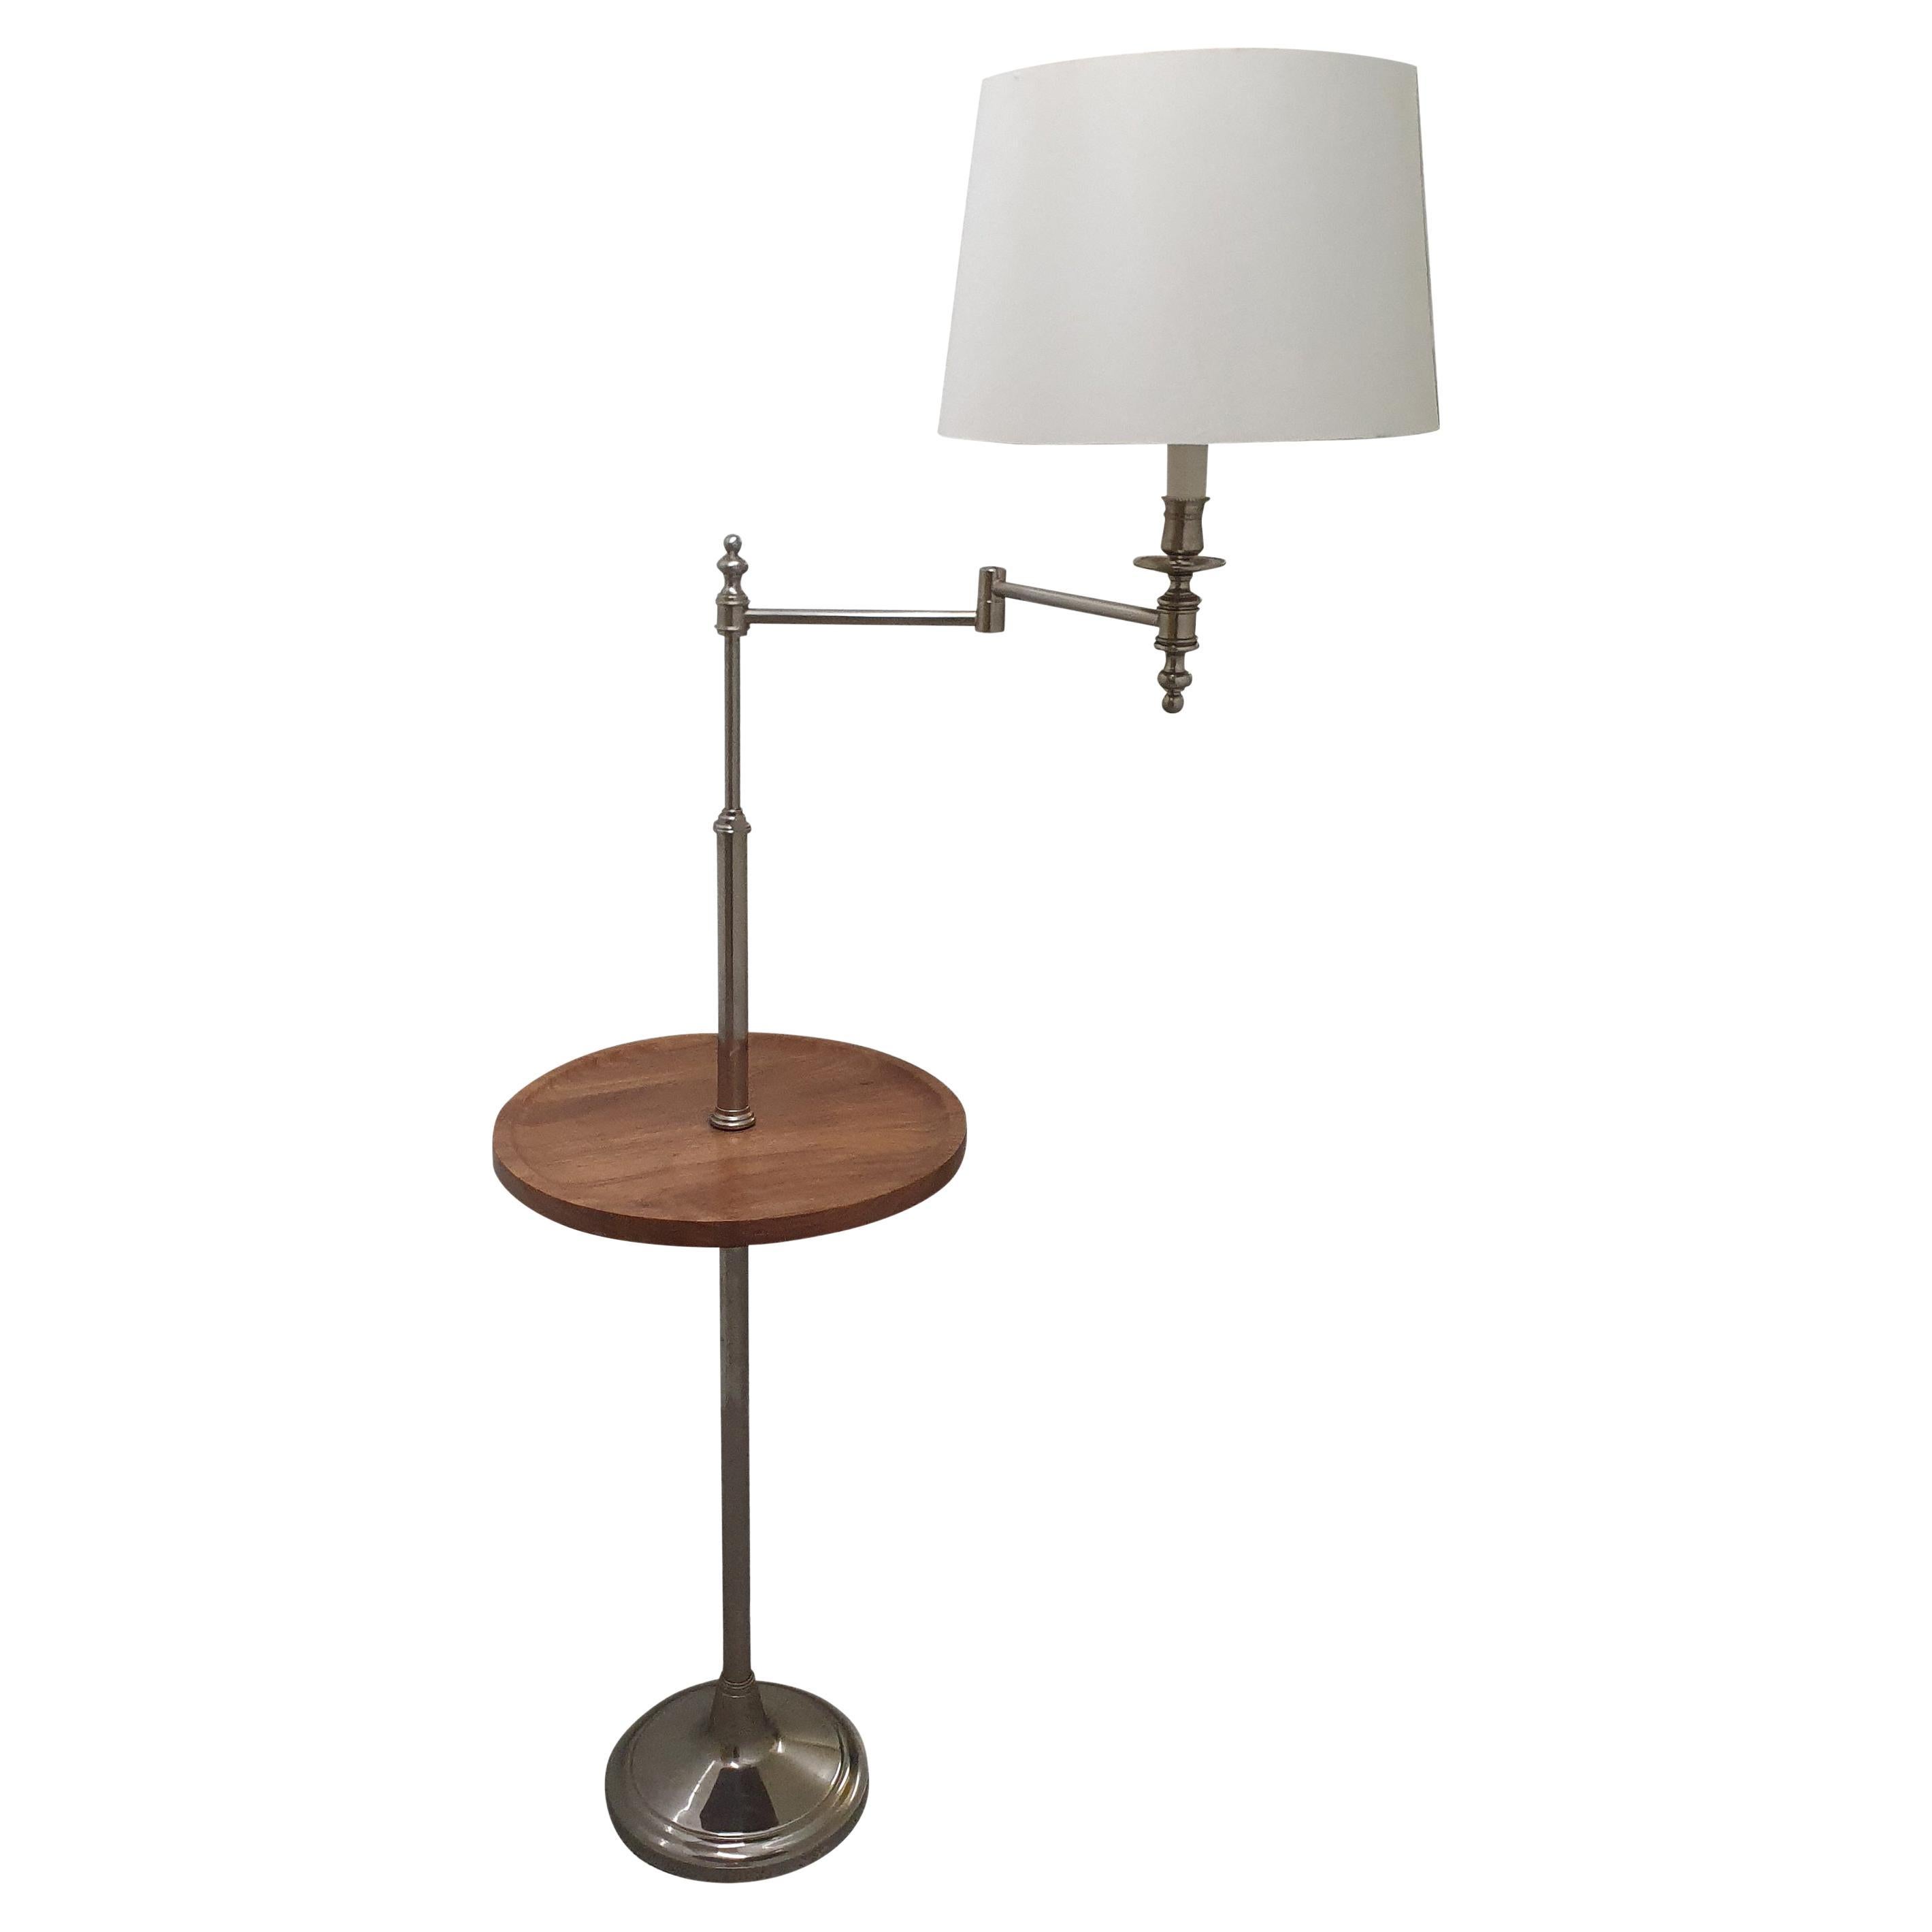 21st Century Swing Arm Floor Lamp with Floating American Walnut Table by Linley